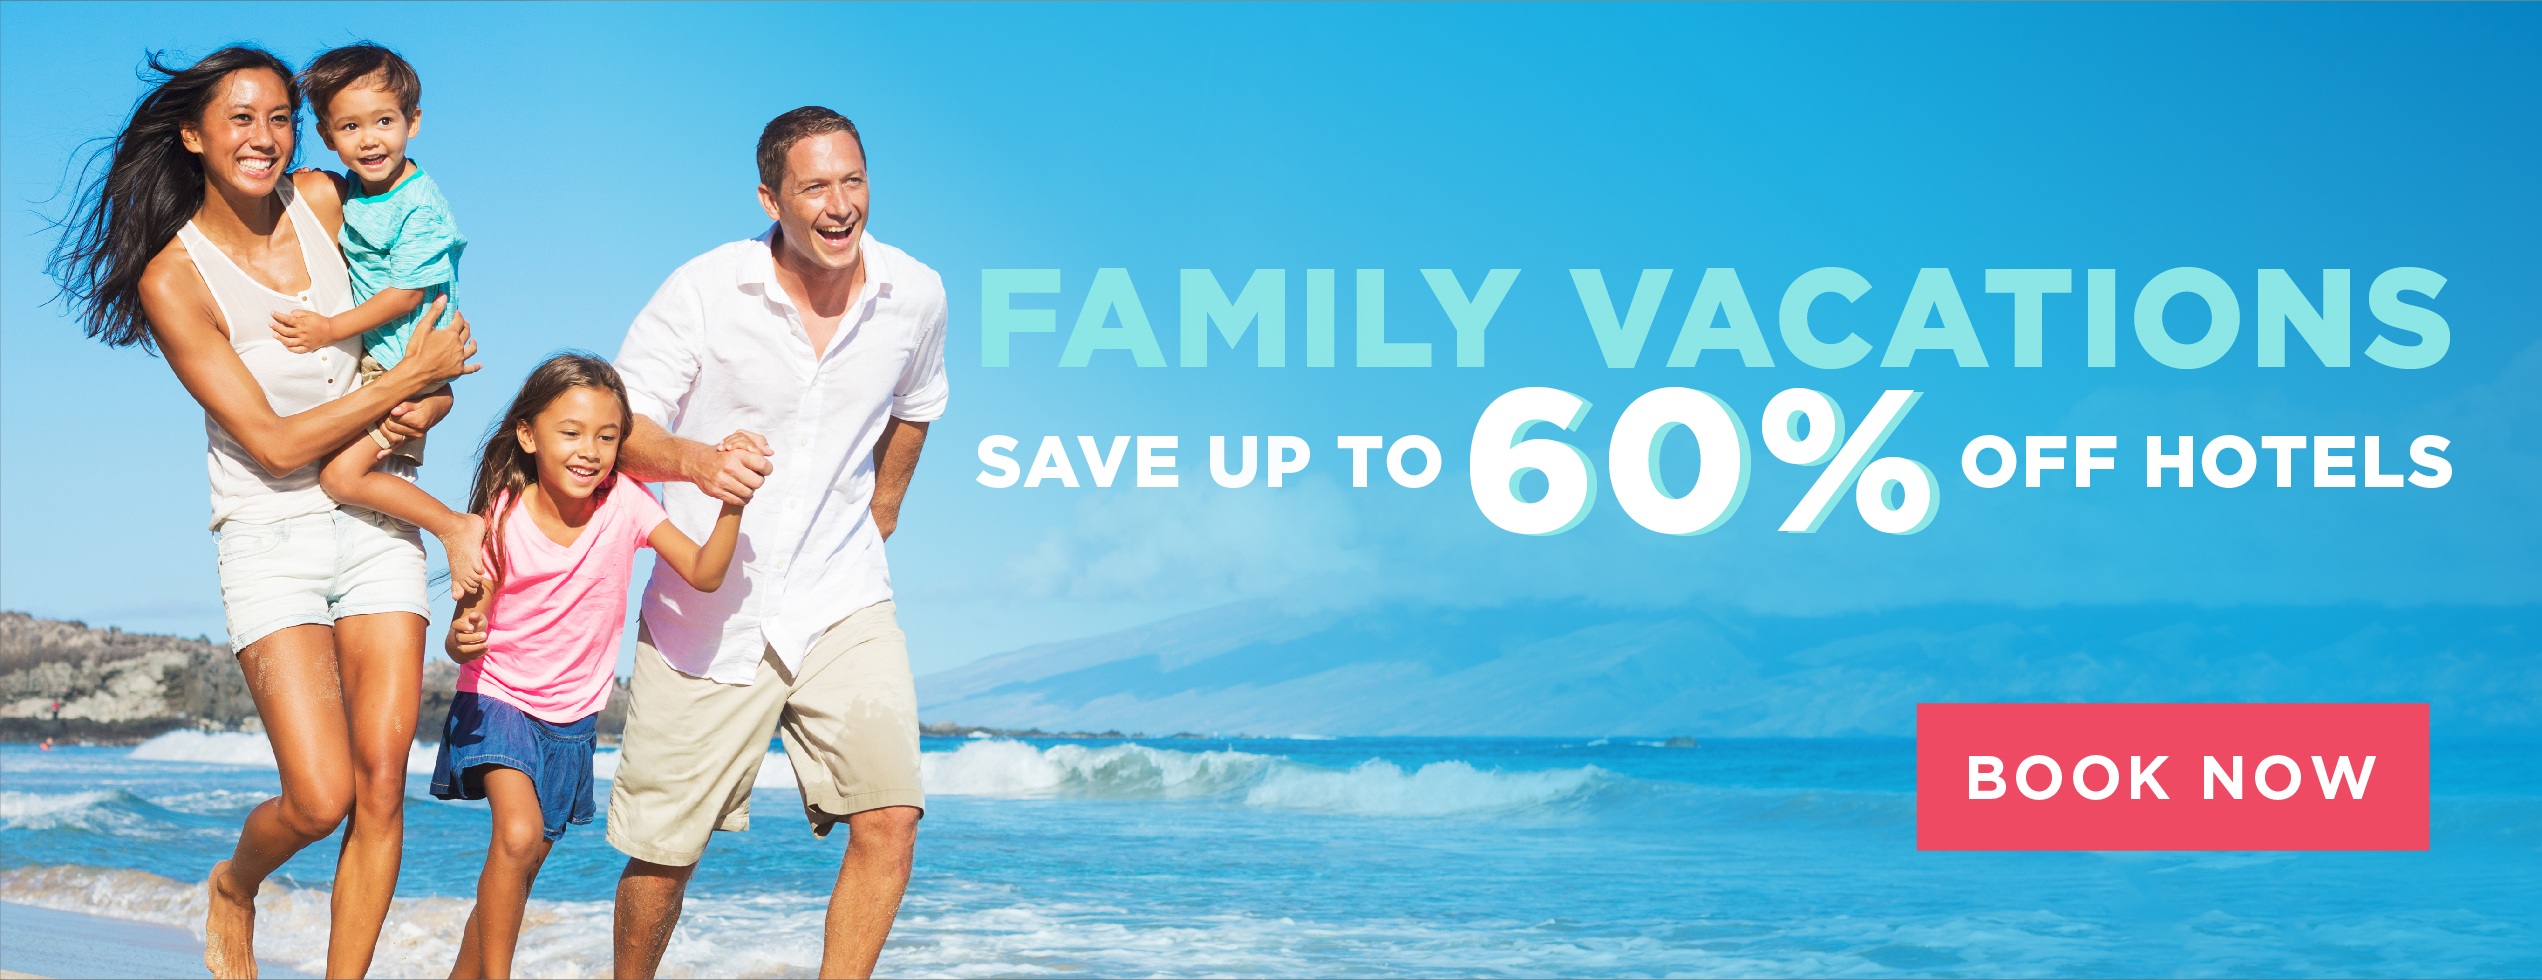 Family Vacation - Save up to 60% off hotels